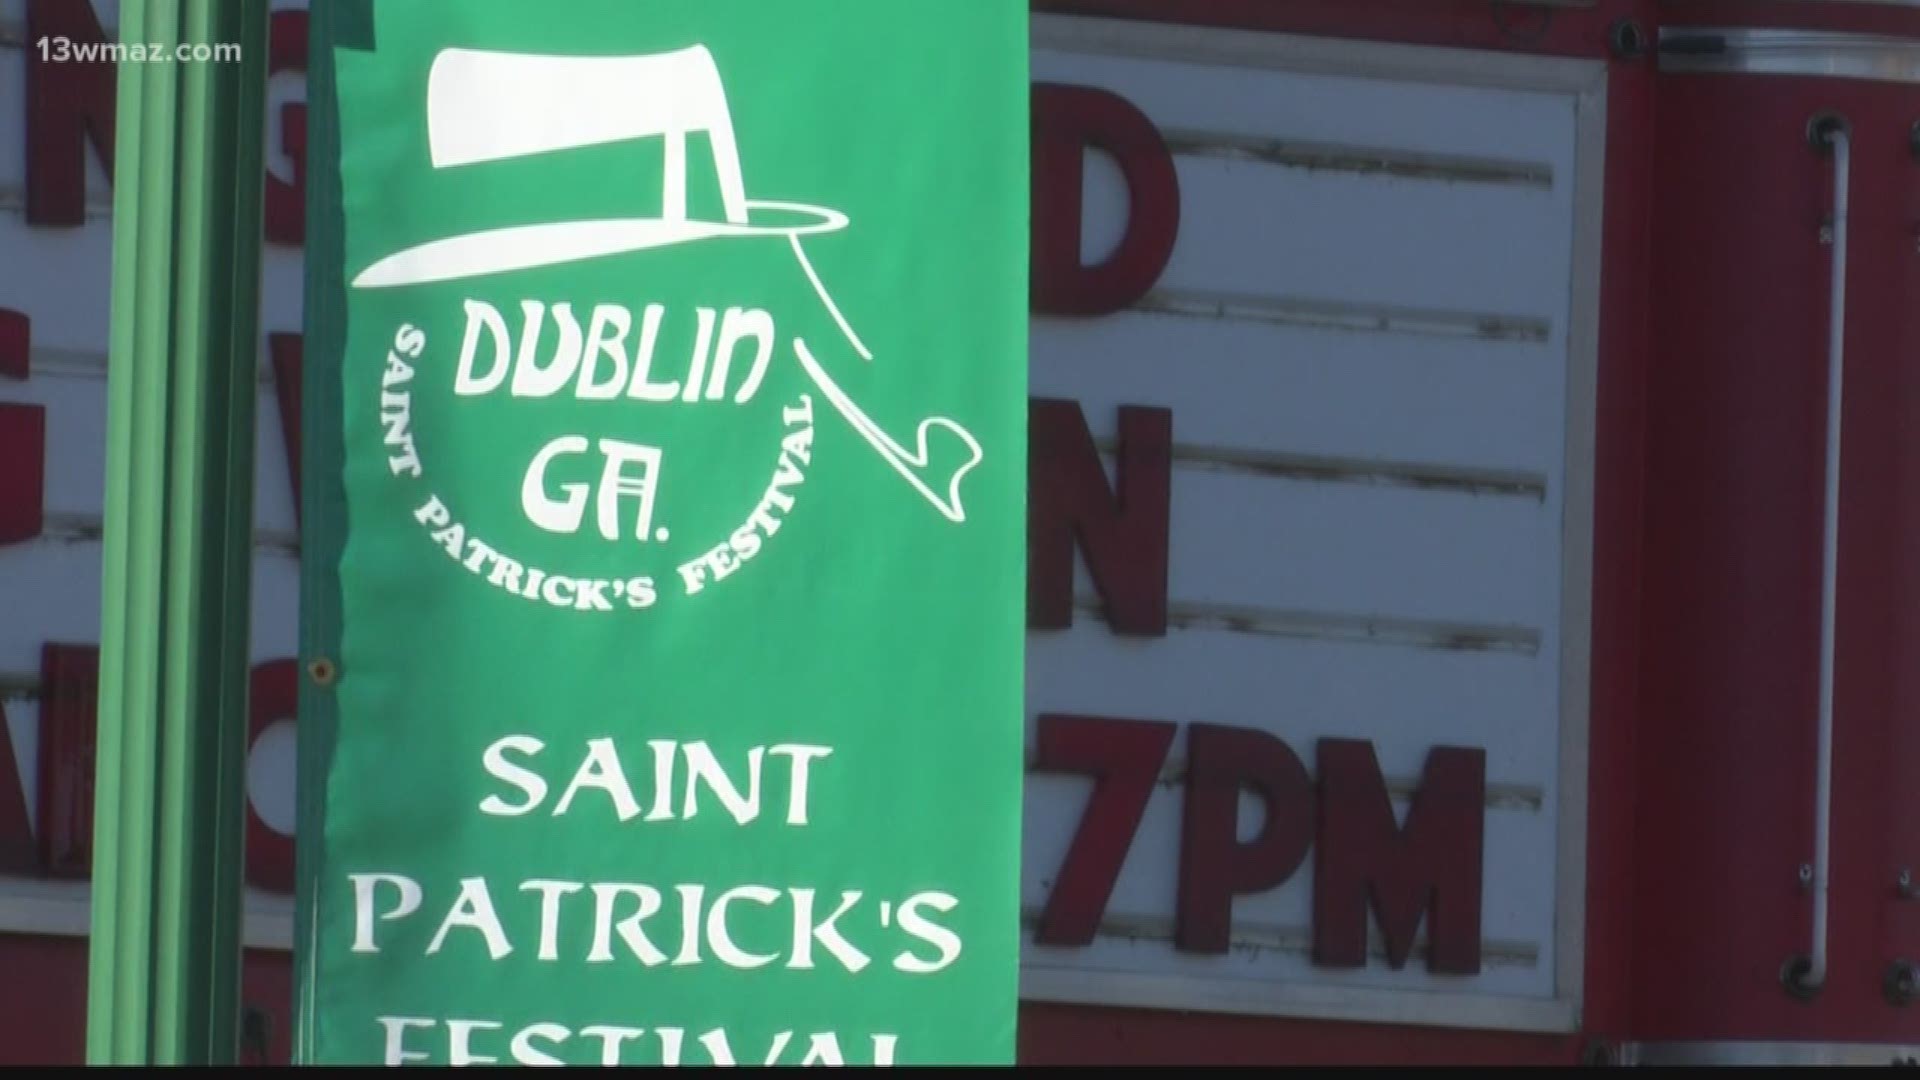 Georgia's Emerald City is known for its month long St Patrick's Day celebration in March, but where did the city get its name and what events do they have?